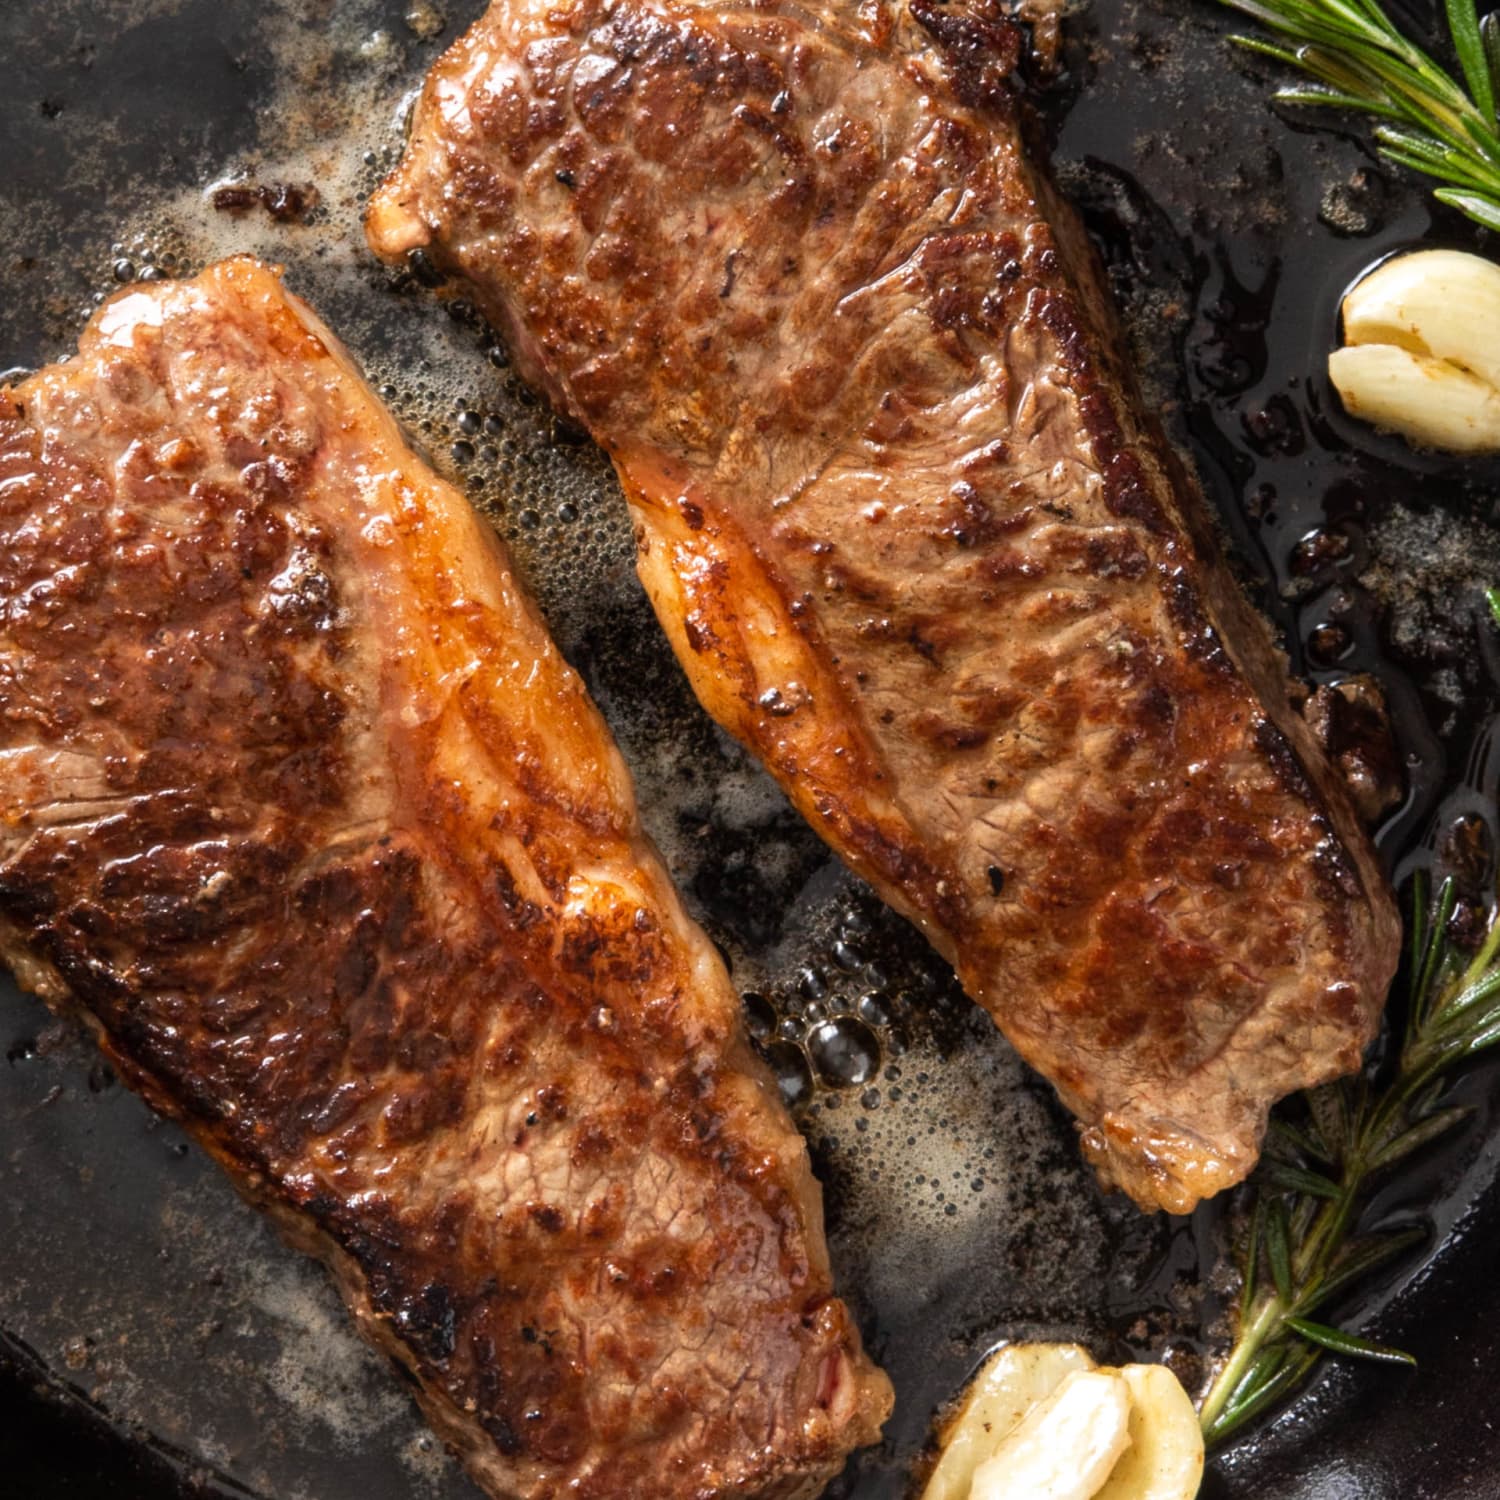 The Best Gear for Cooking a Restaurant-Quality Steak at Home